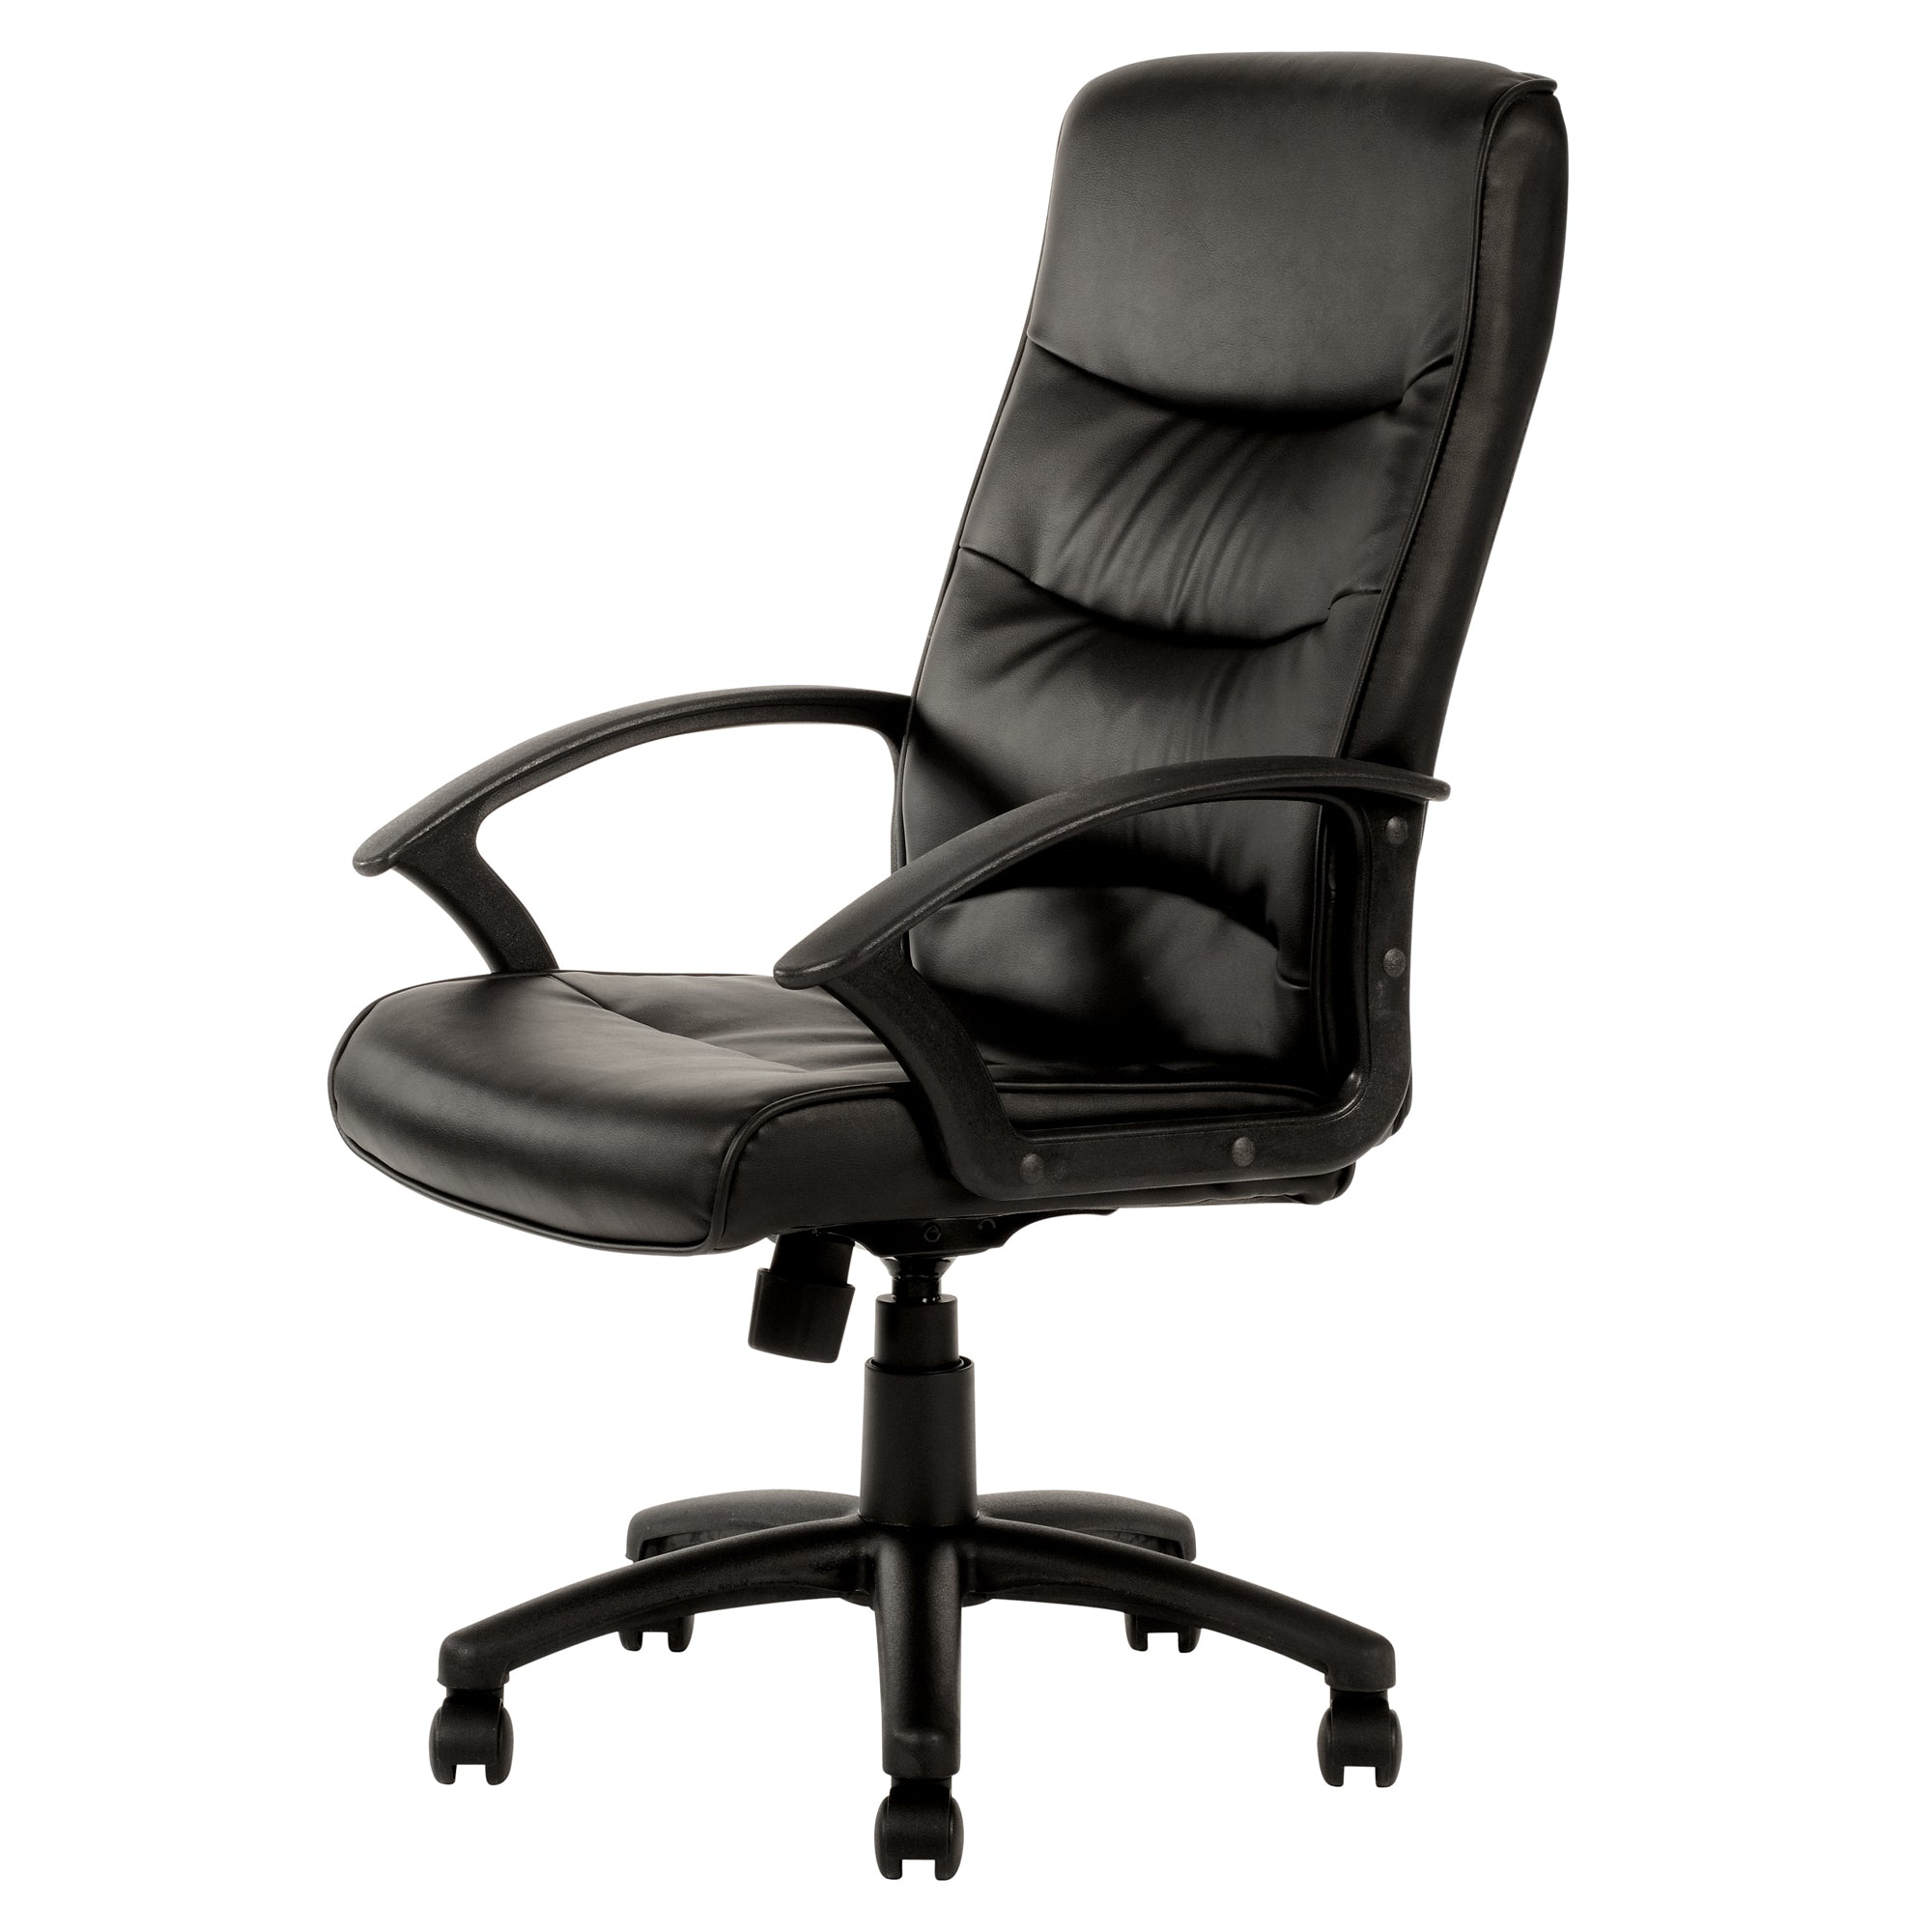 Star Executive Office Chair PU Leather Super Comfortable YS111